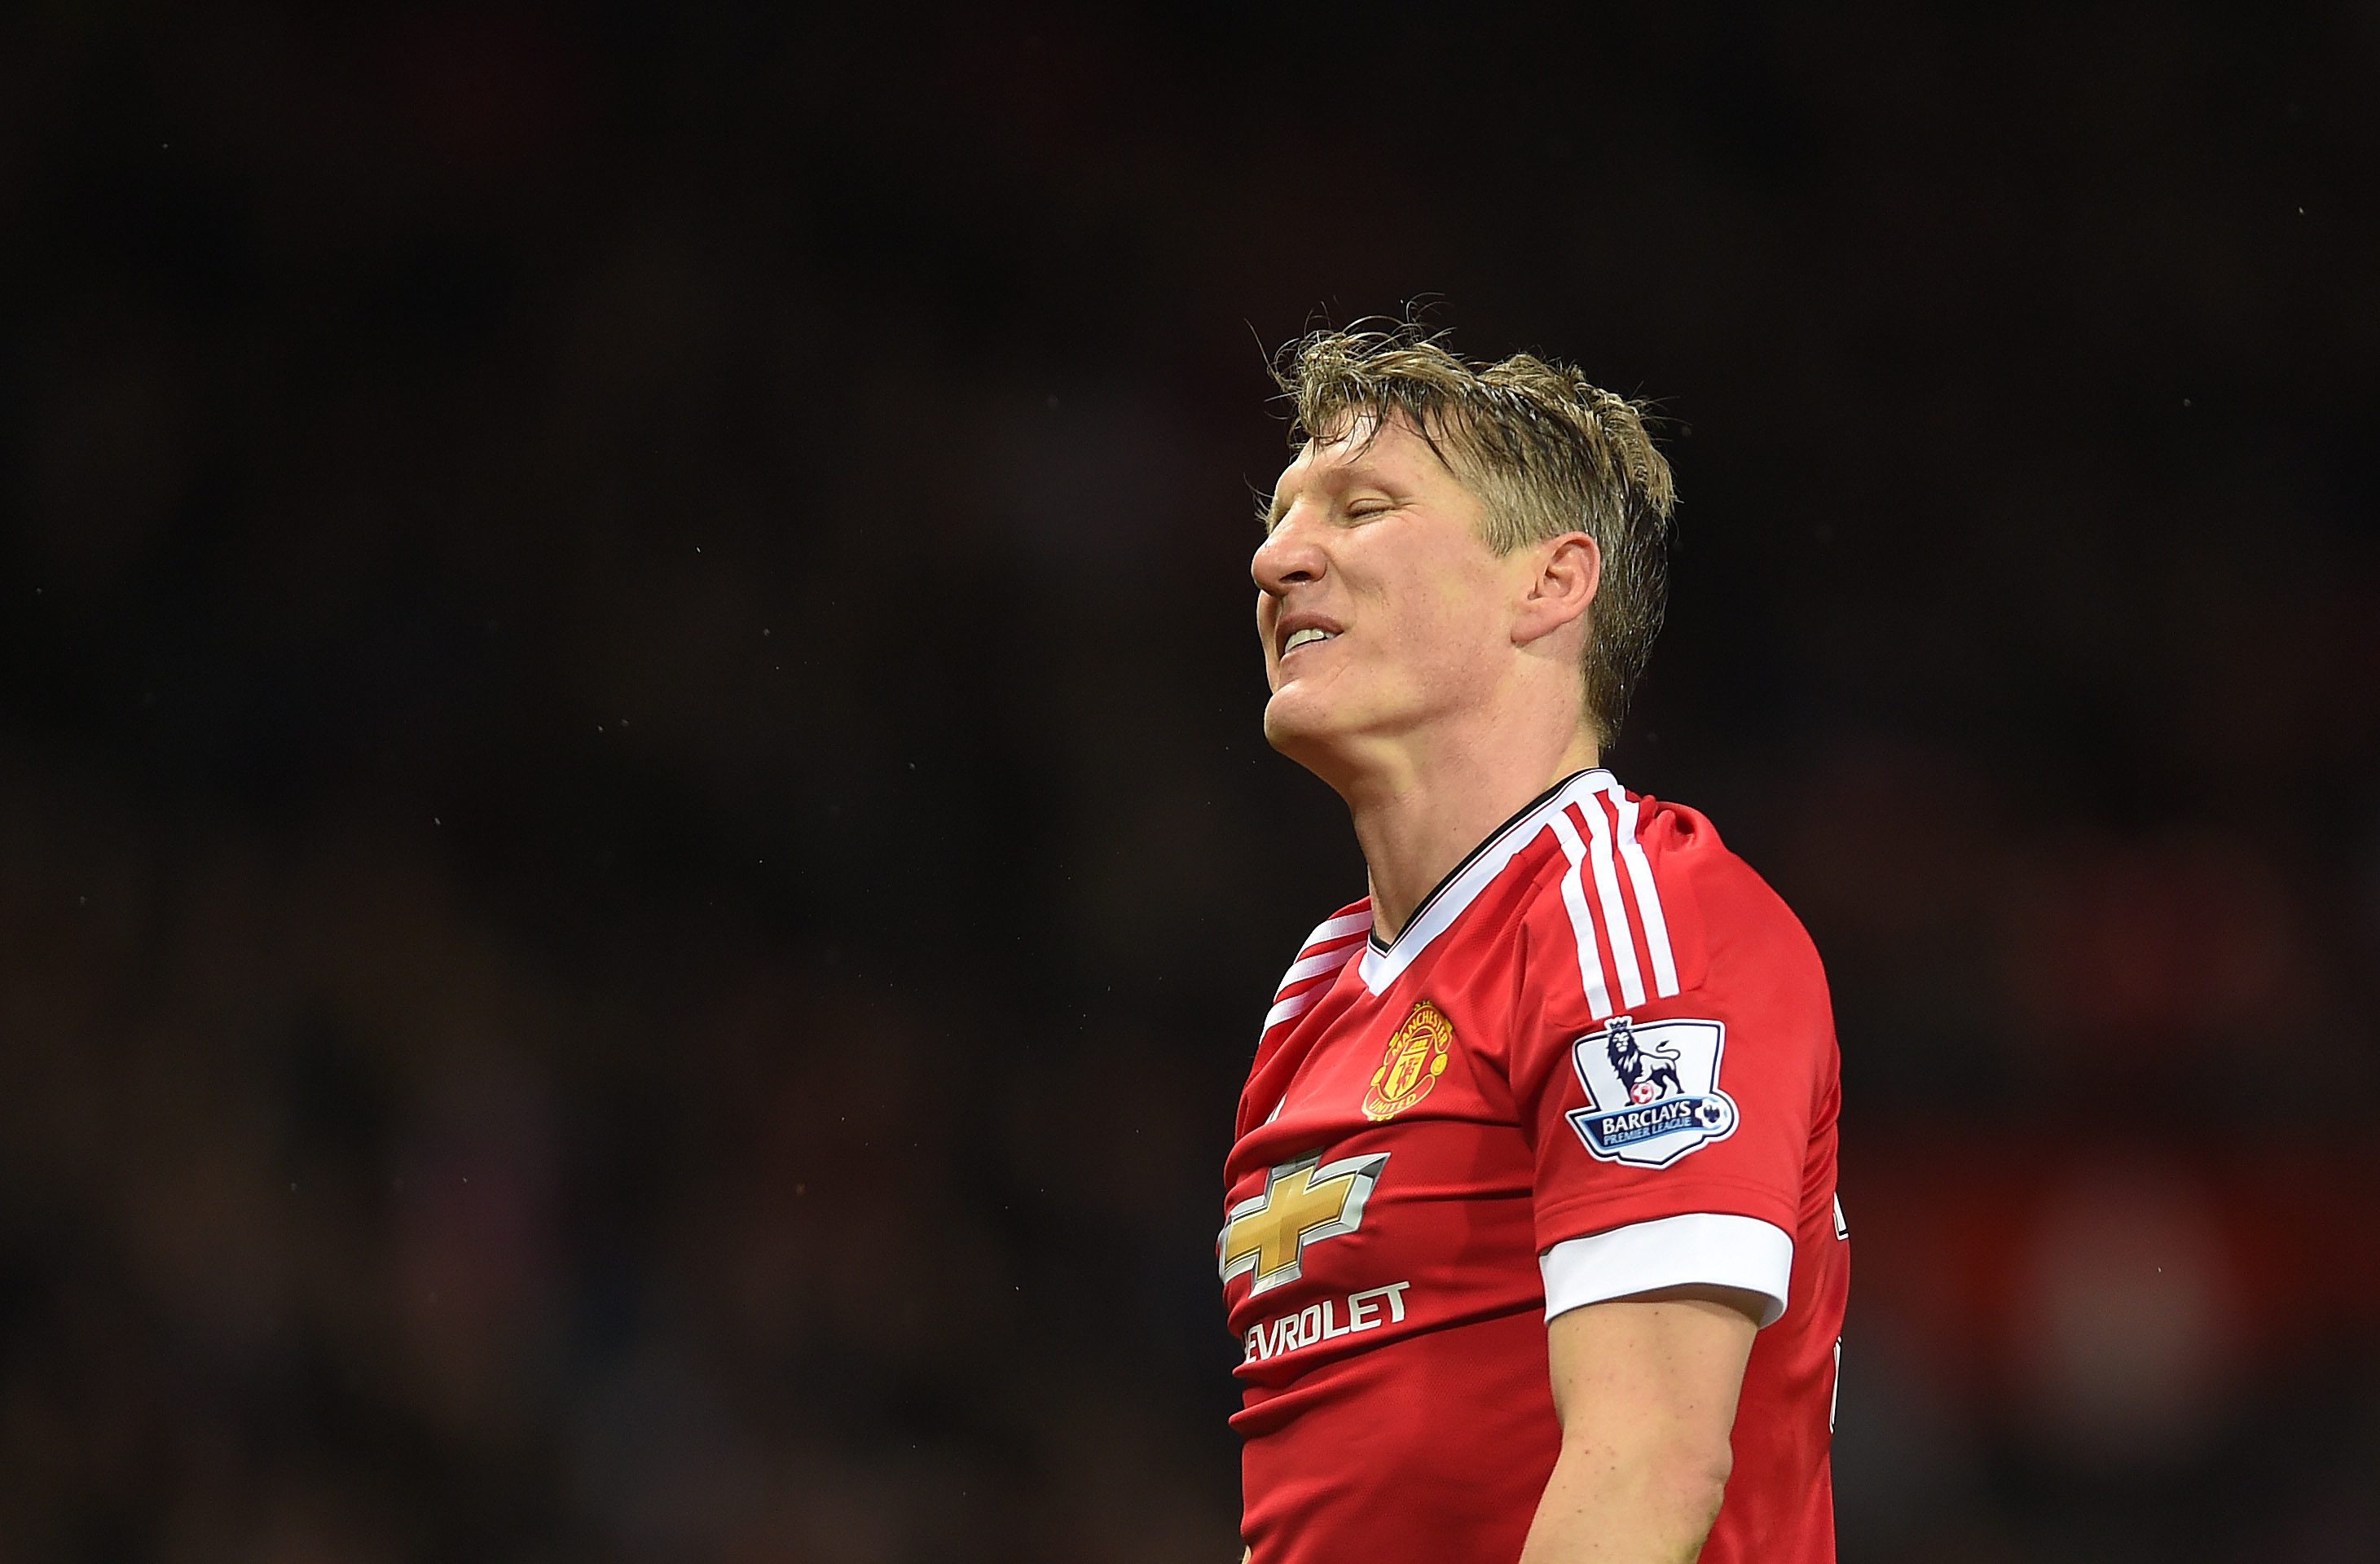 Schweinsteiger has failed to make his mark at Manchester United but is seemingly set to stay put at Old Trafford and bide his time much to the frustration of Jose Mourinho. (Picture Courtesy - AFP/Getty Images)